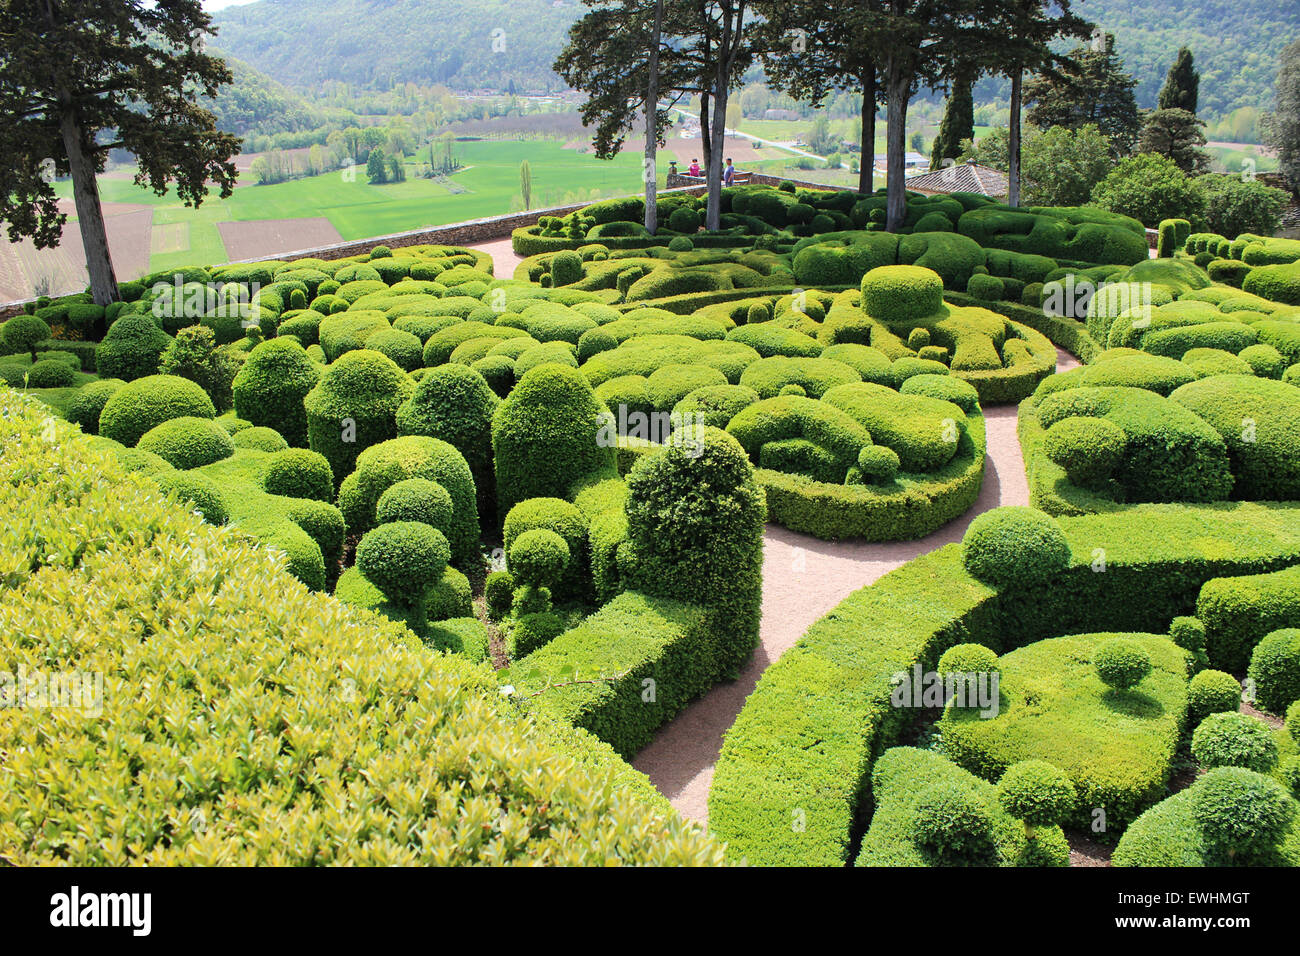 View of the Dordogne valley in the background of the creative and unusual topiary boxwood gardens Stock Photo